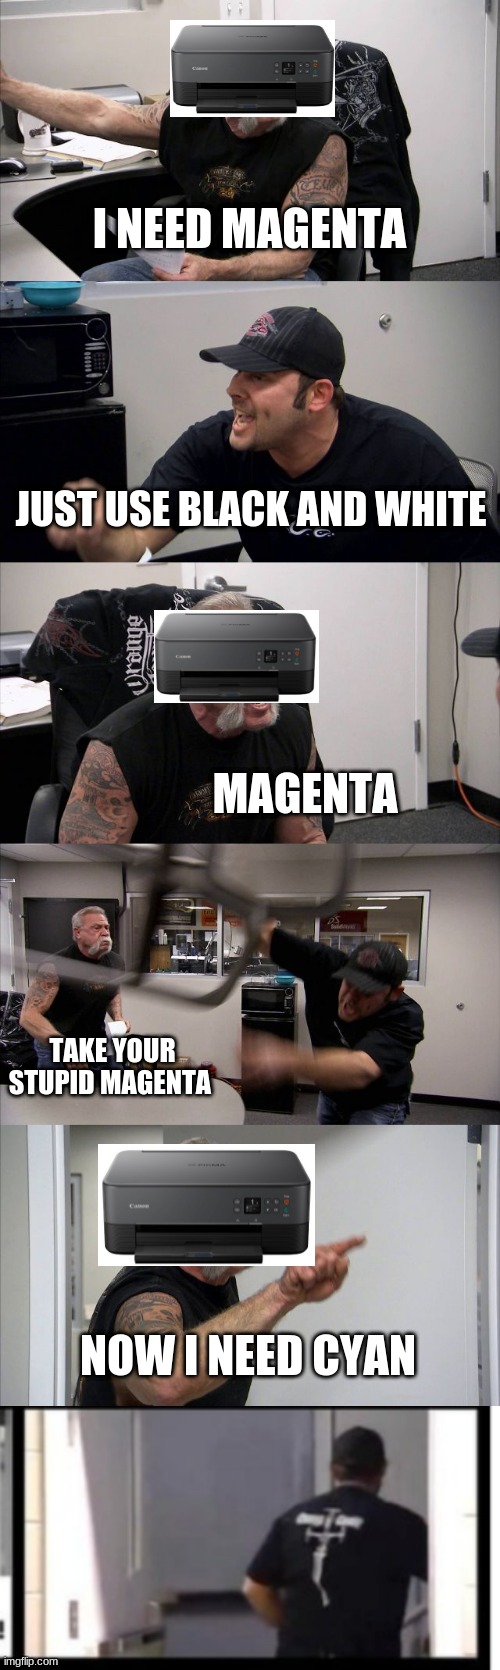 I NEED MAGENTA; JUST USE BLACK AND WHITE; MAGENTA; TAKE YOUR STUPID MAGENTA; NOW I NEED CYAN | image tagged in memes,american chopper argument | made w/ Imgflip meme maker